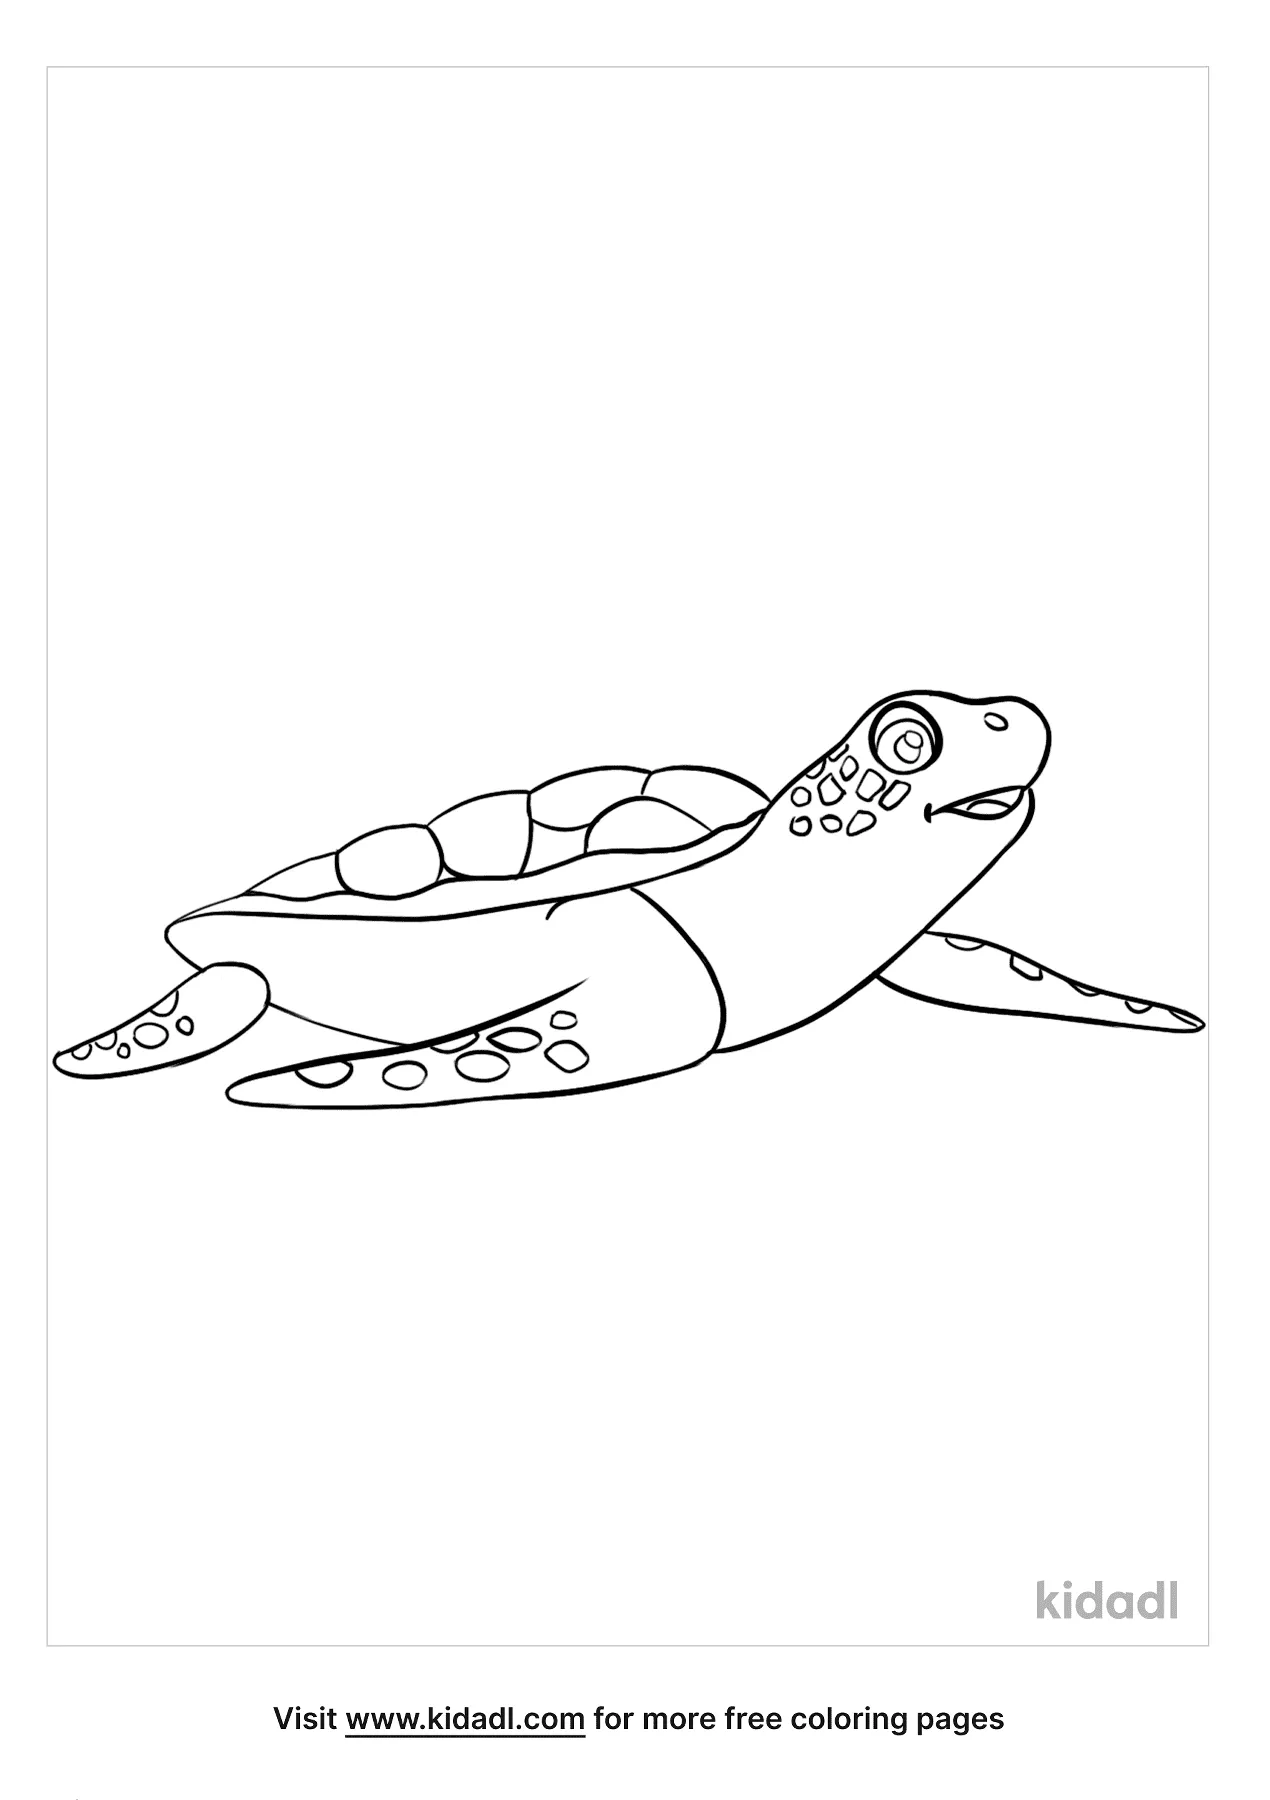 Free Baby Turtle Coloring Page | Coloring Page Printables | Kidadl